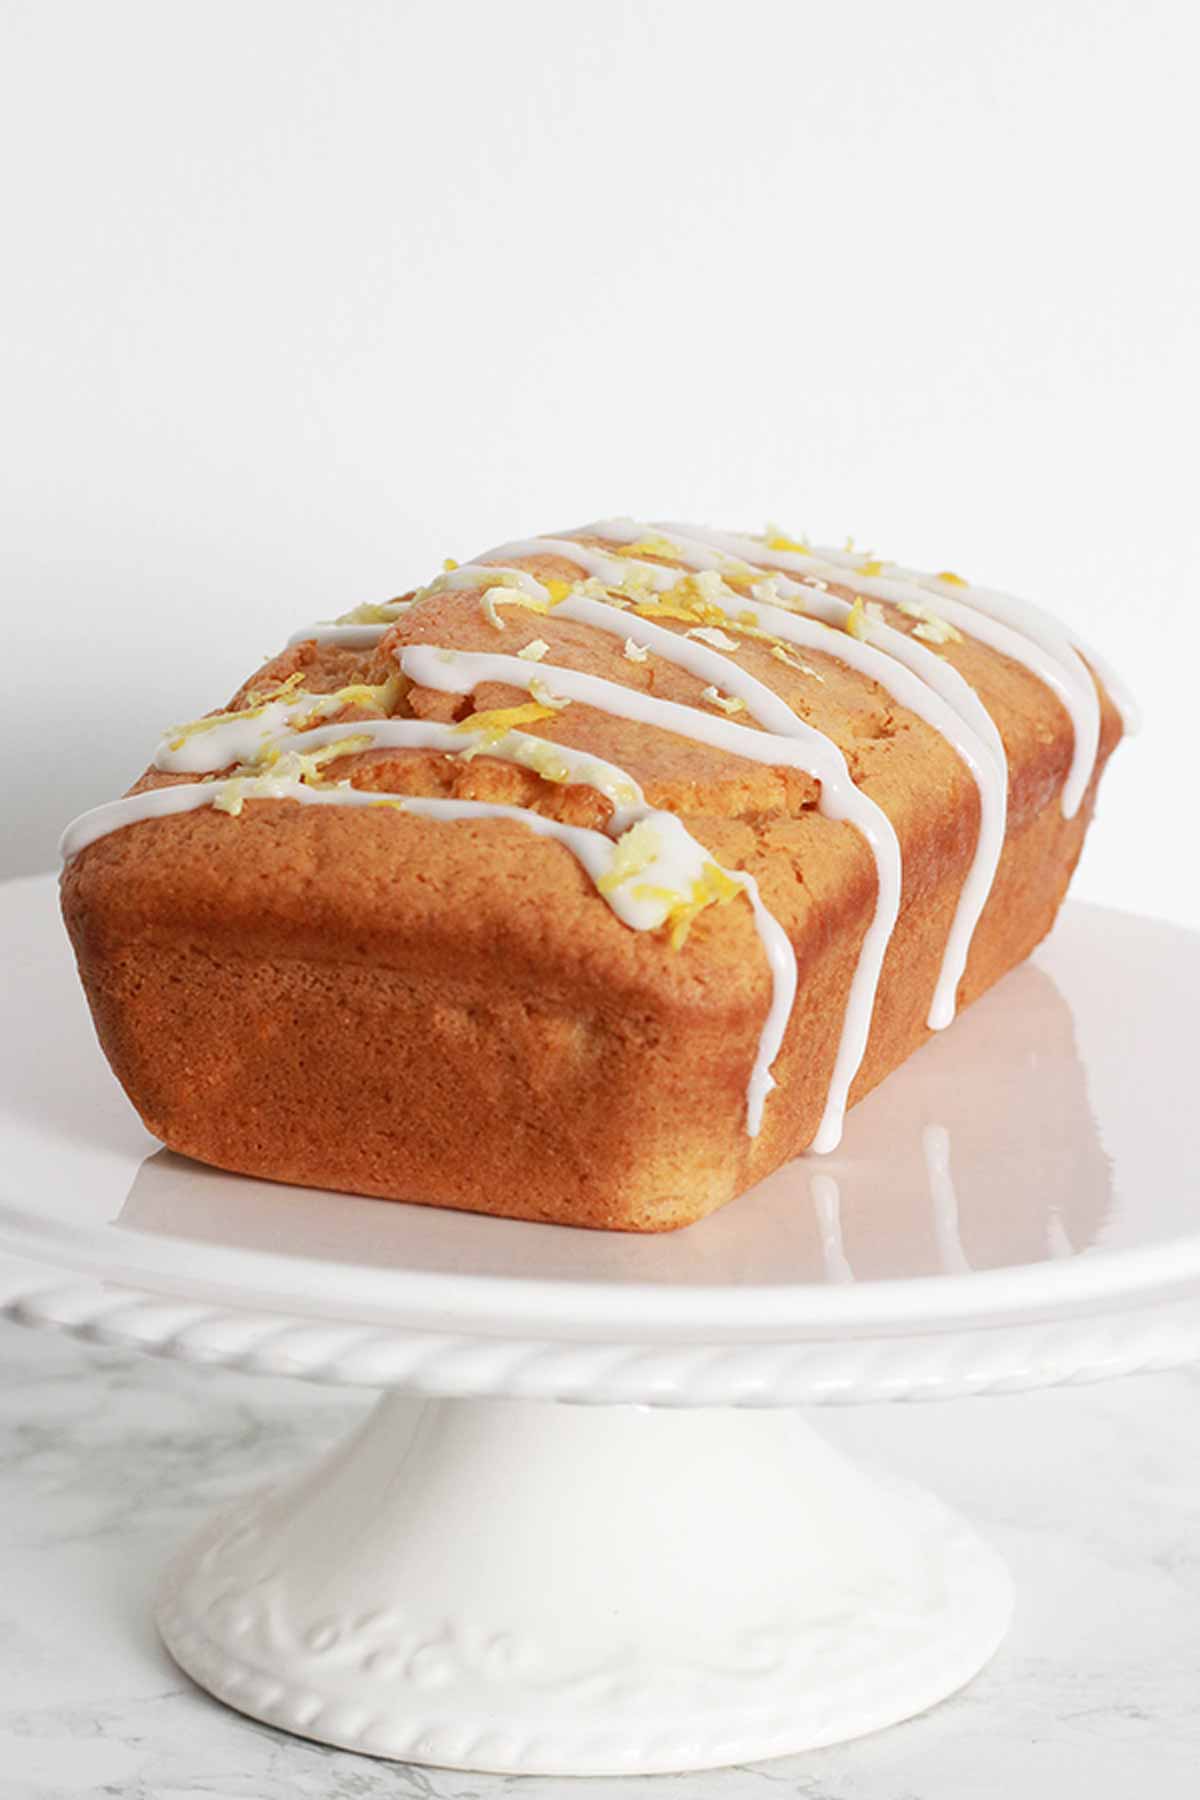 Lemon Drizzle Loaf With Icing Drizzled On Top